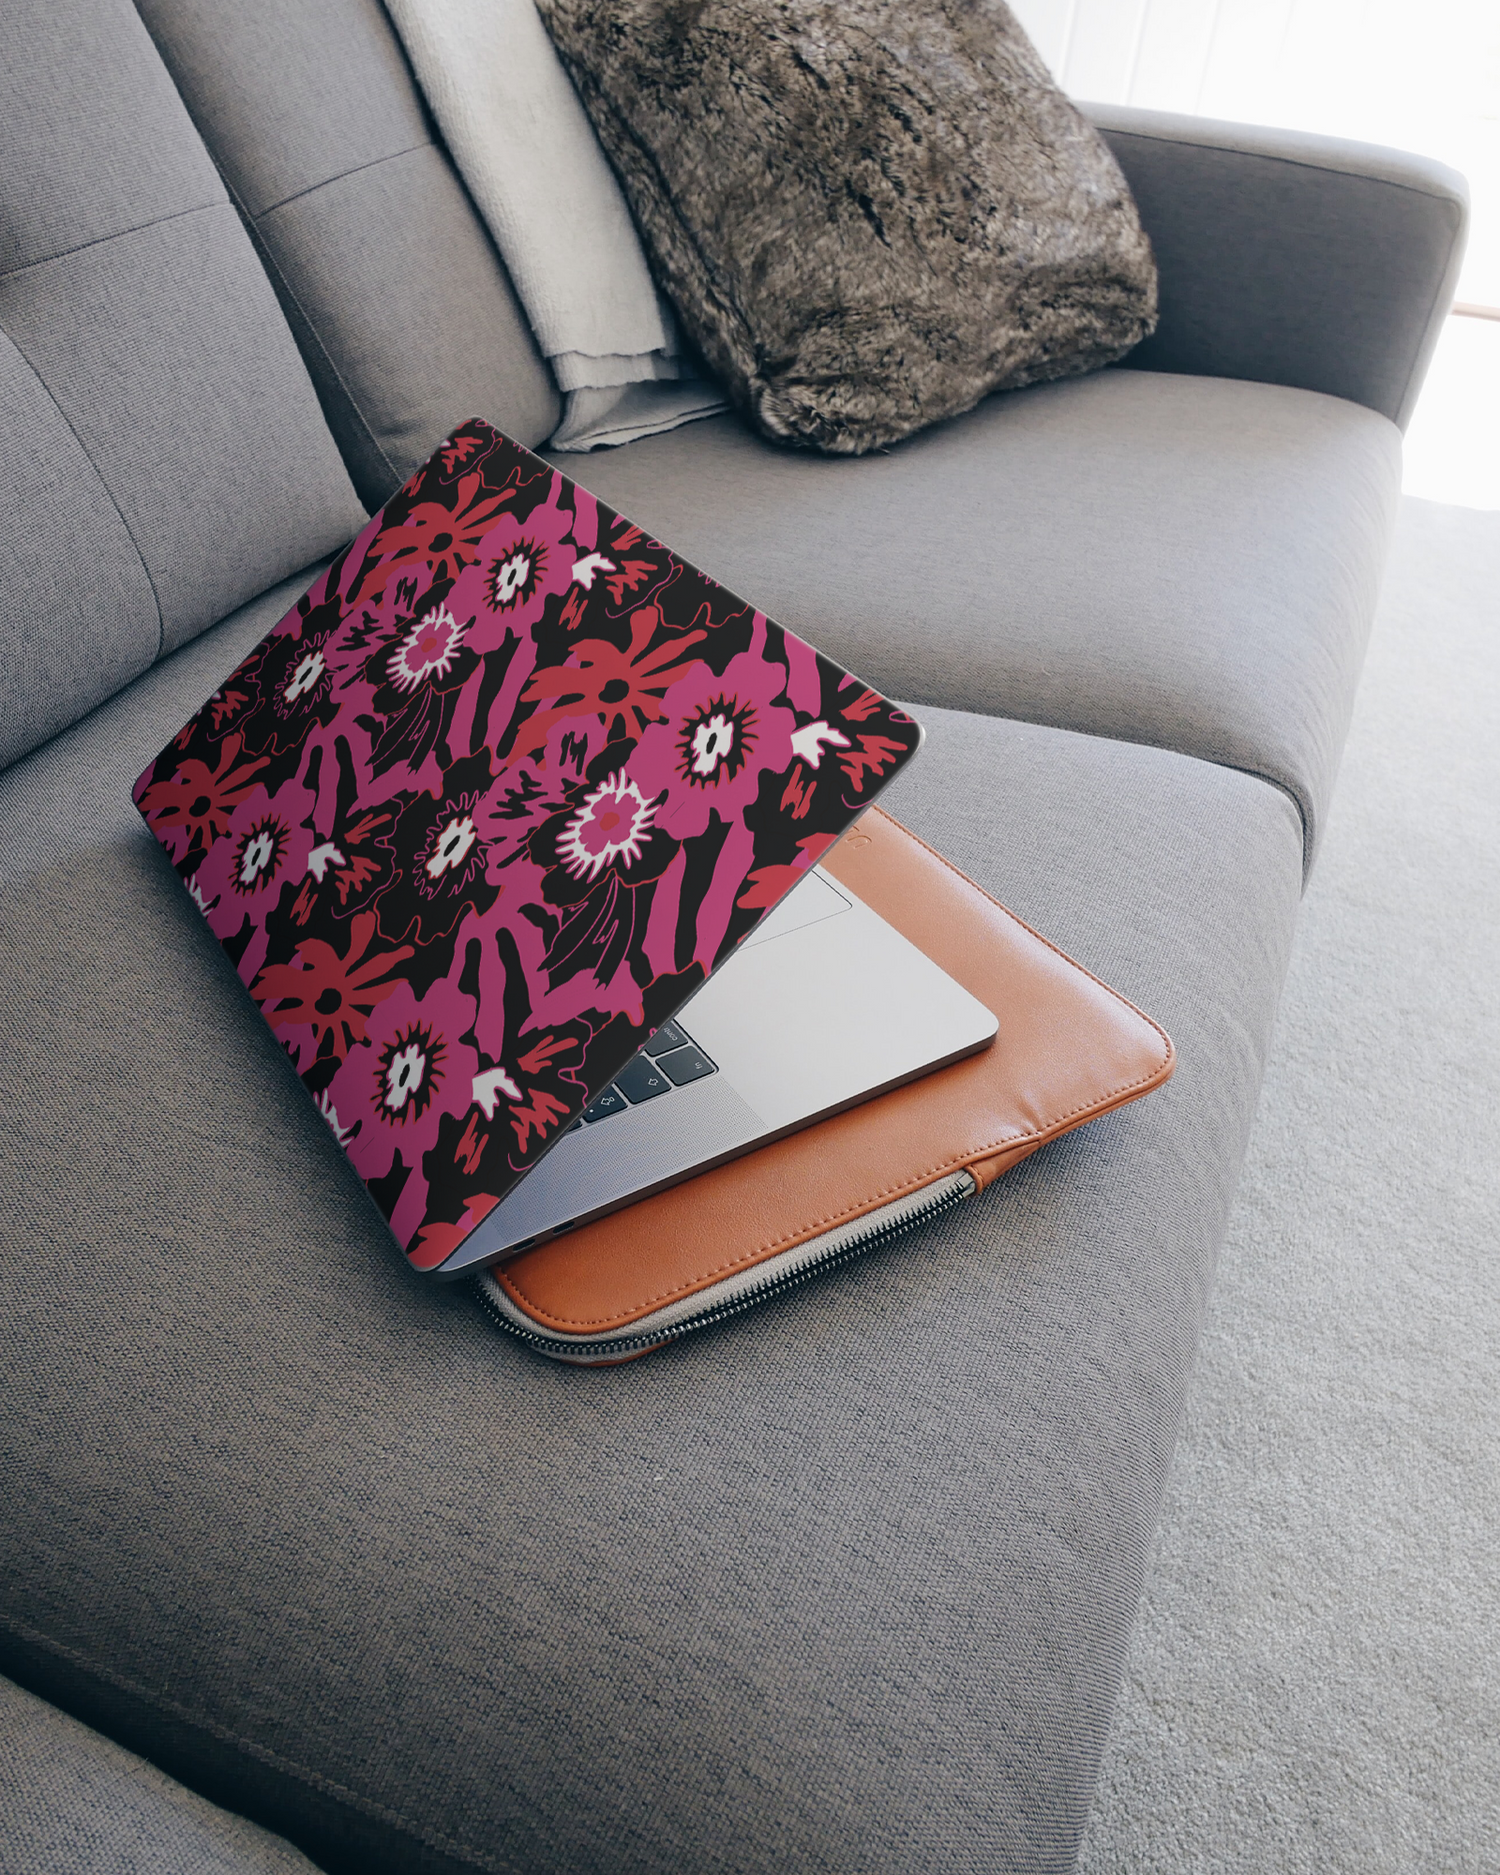 Flower Works Laptop Skin for 15 inch Apple MacBooks on a couch